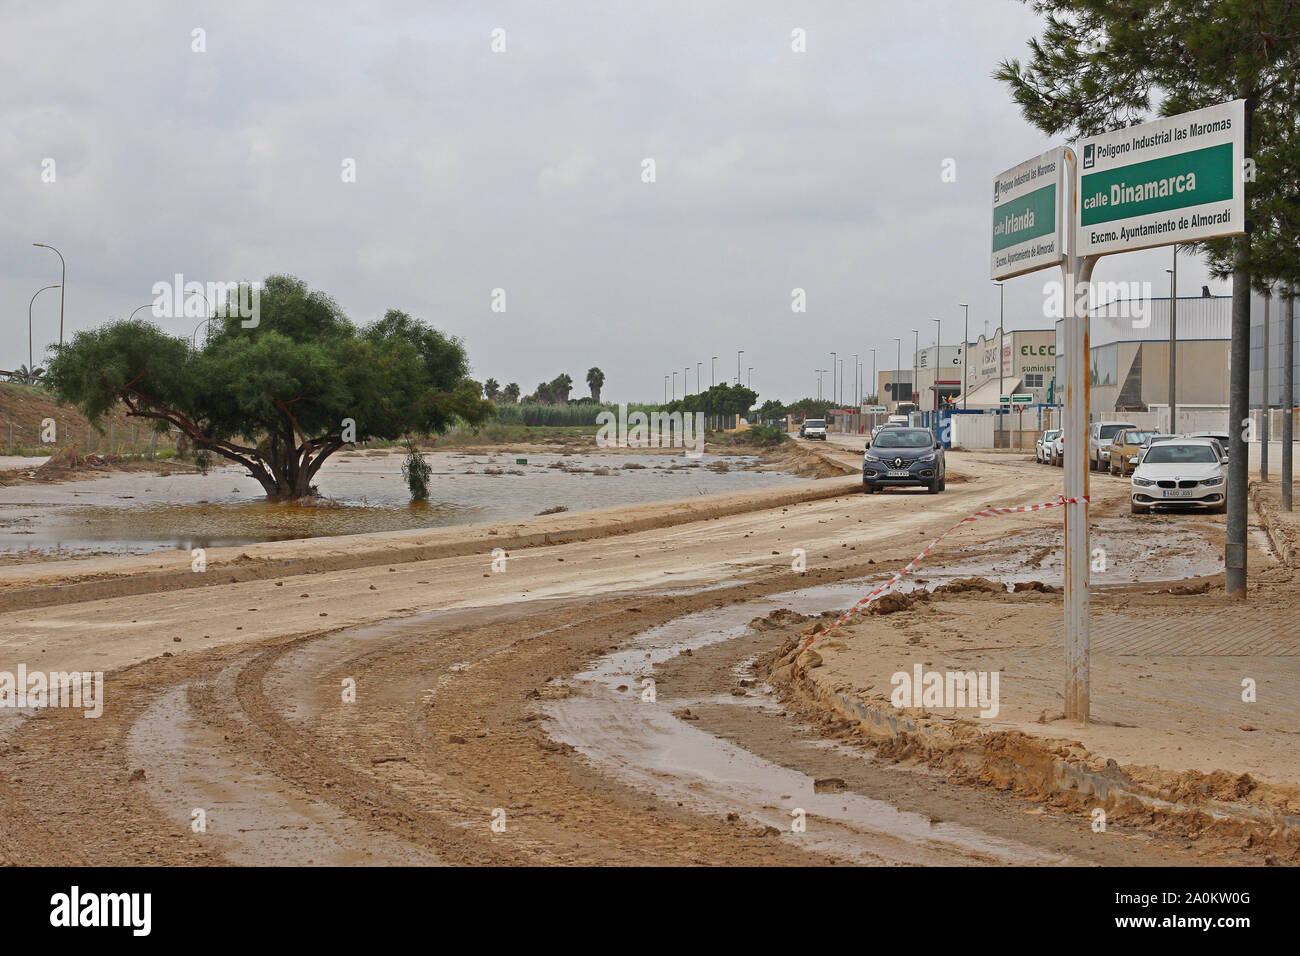 Almoradi, S.E.Spain. A massive clean up campaign needed to put this industrial estate back to normal after the massive gota fria storm  in Sept. 2019. Stock Photo